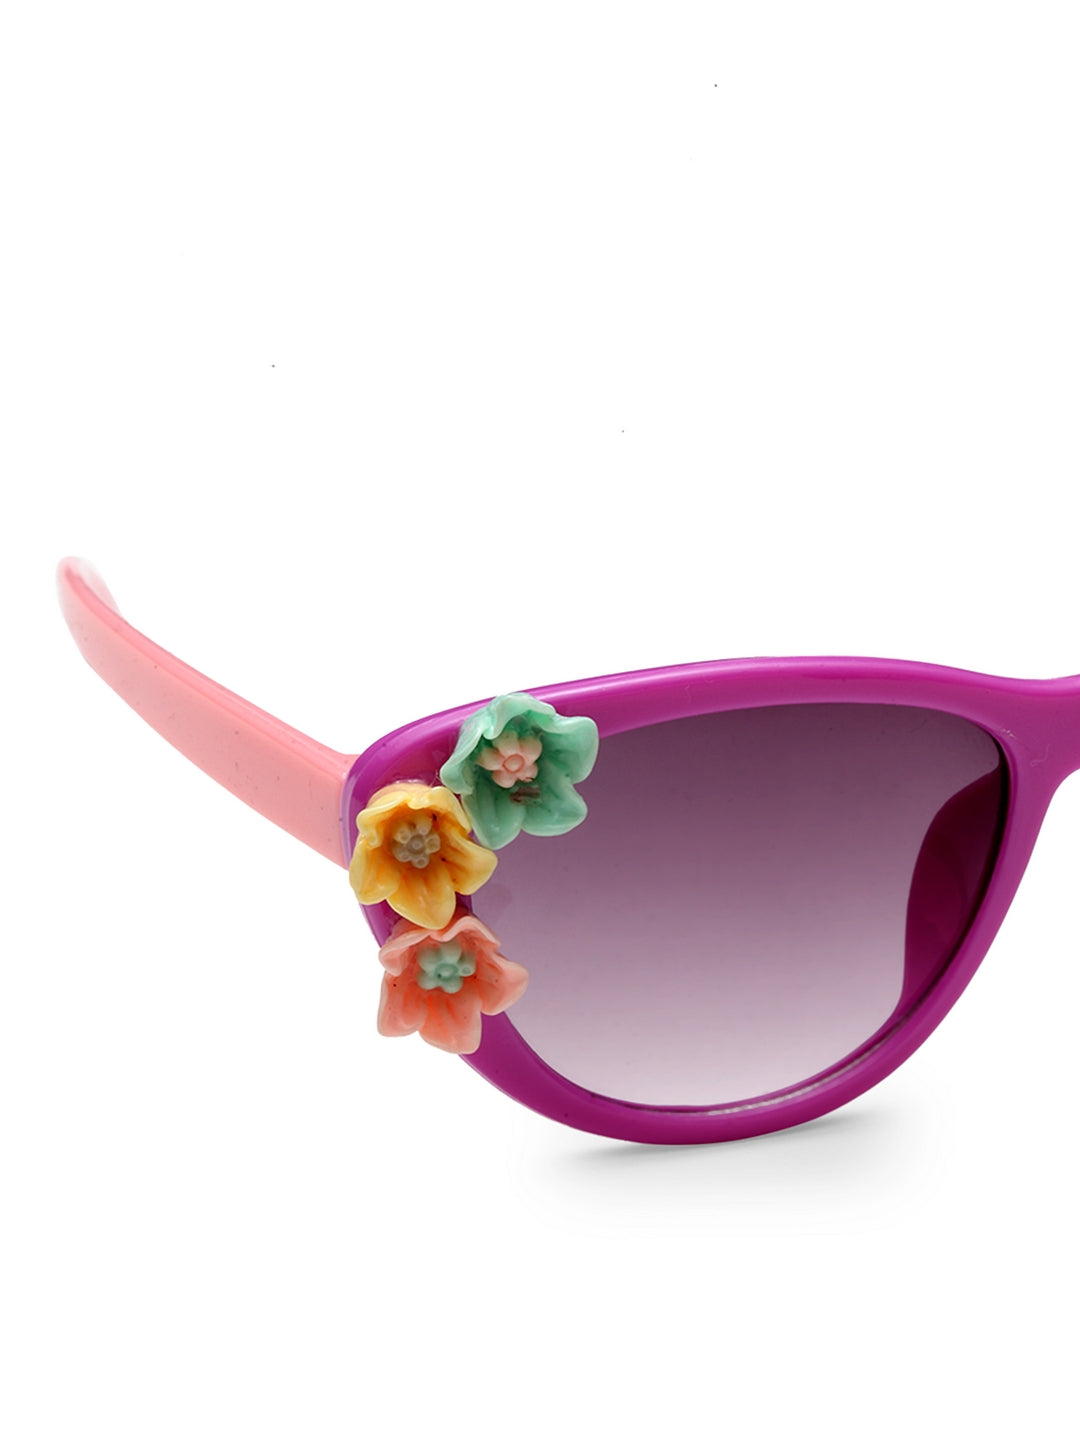 Stol'n Kids Yellow and Blue Bow Applique Rectangular Sunglasses:Yellow and Blue Blue and Pink